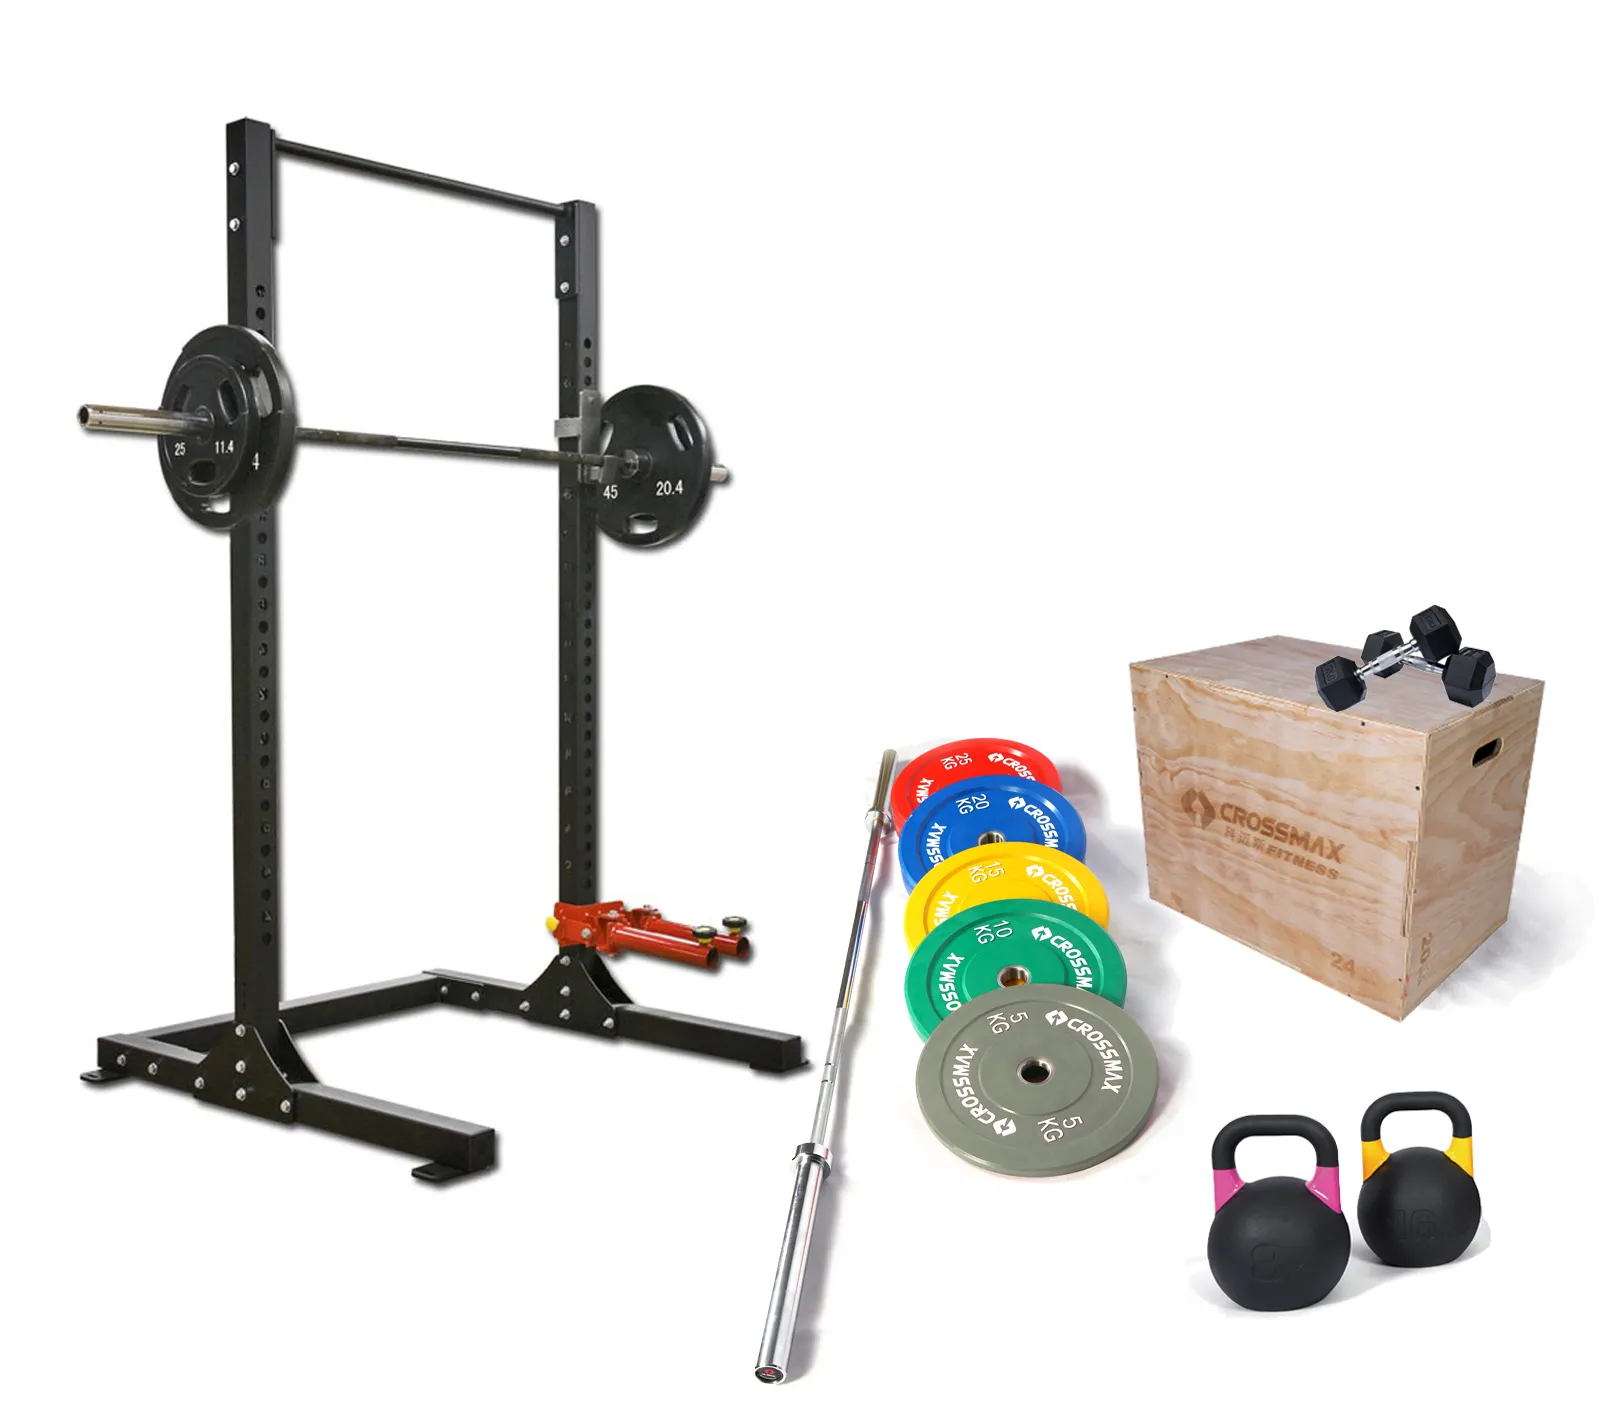 Crossmax Body Building Equipment Packages with Squat Rack, Bumper Plate and Barbell bars